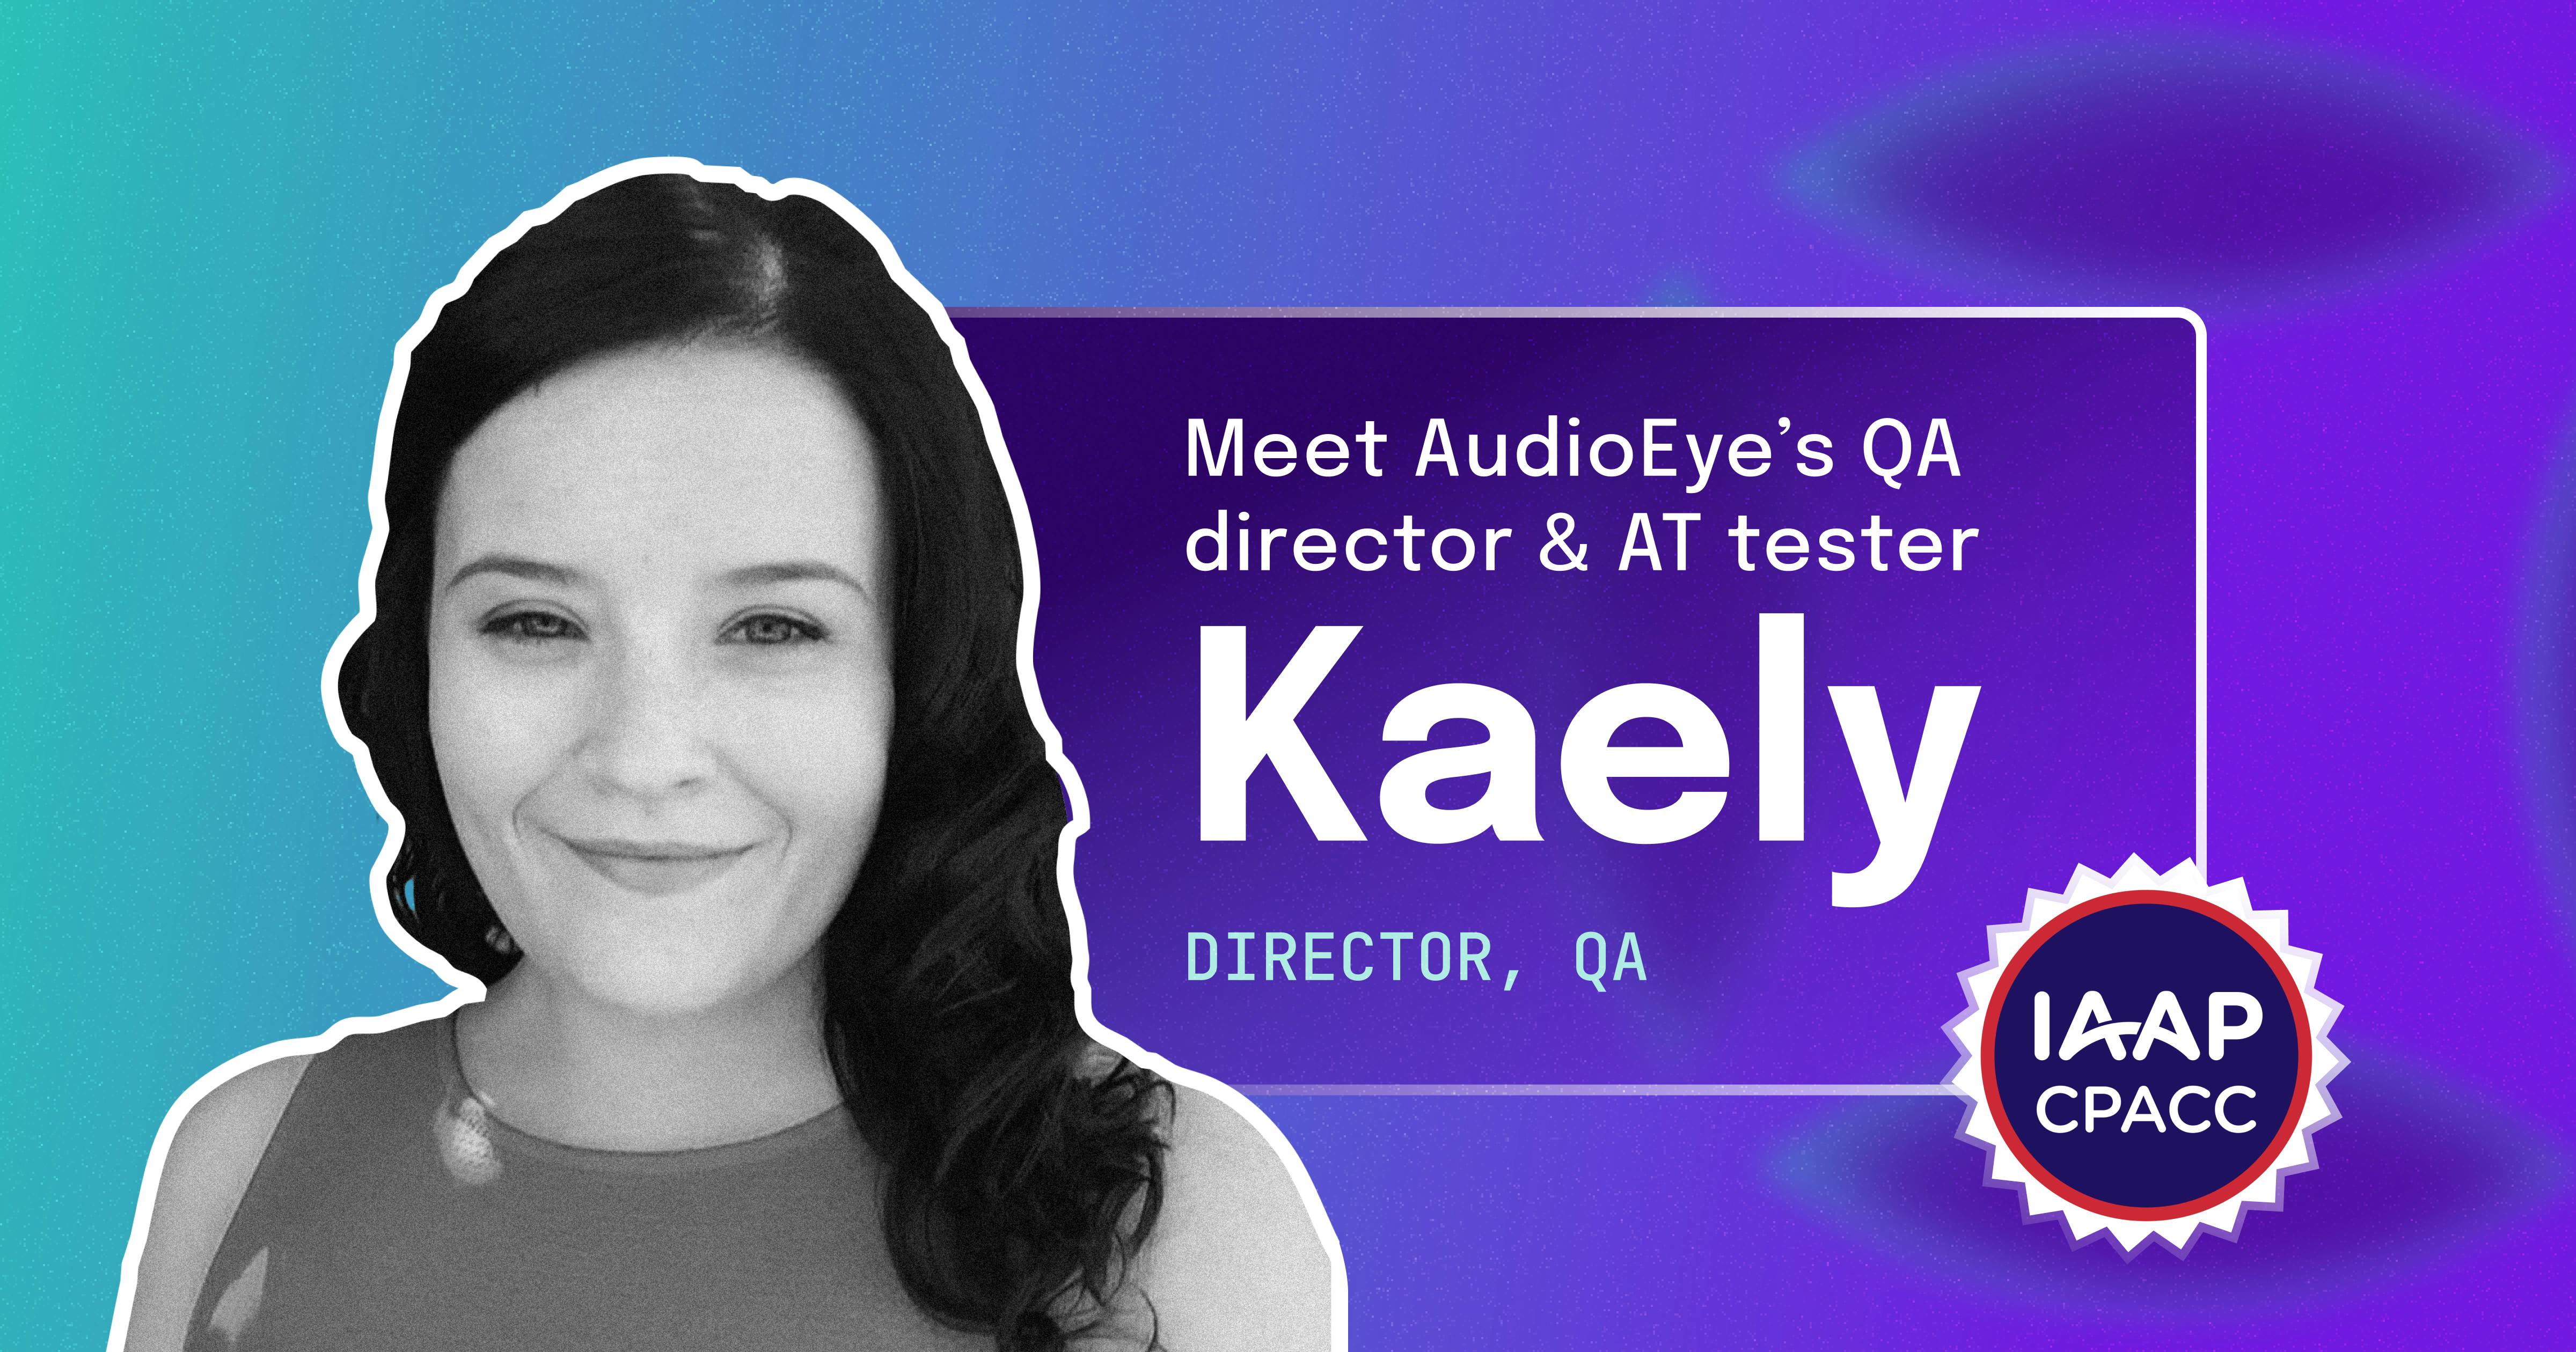 Image of Kaely, director of QA and AT tester at AudioEye